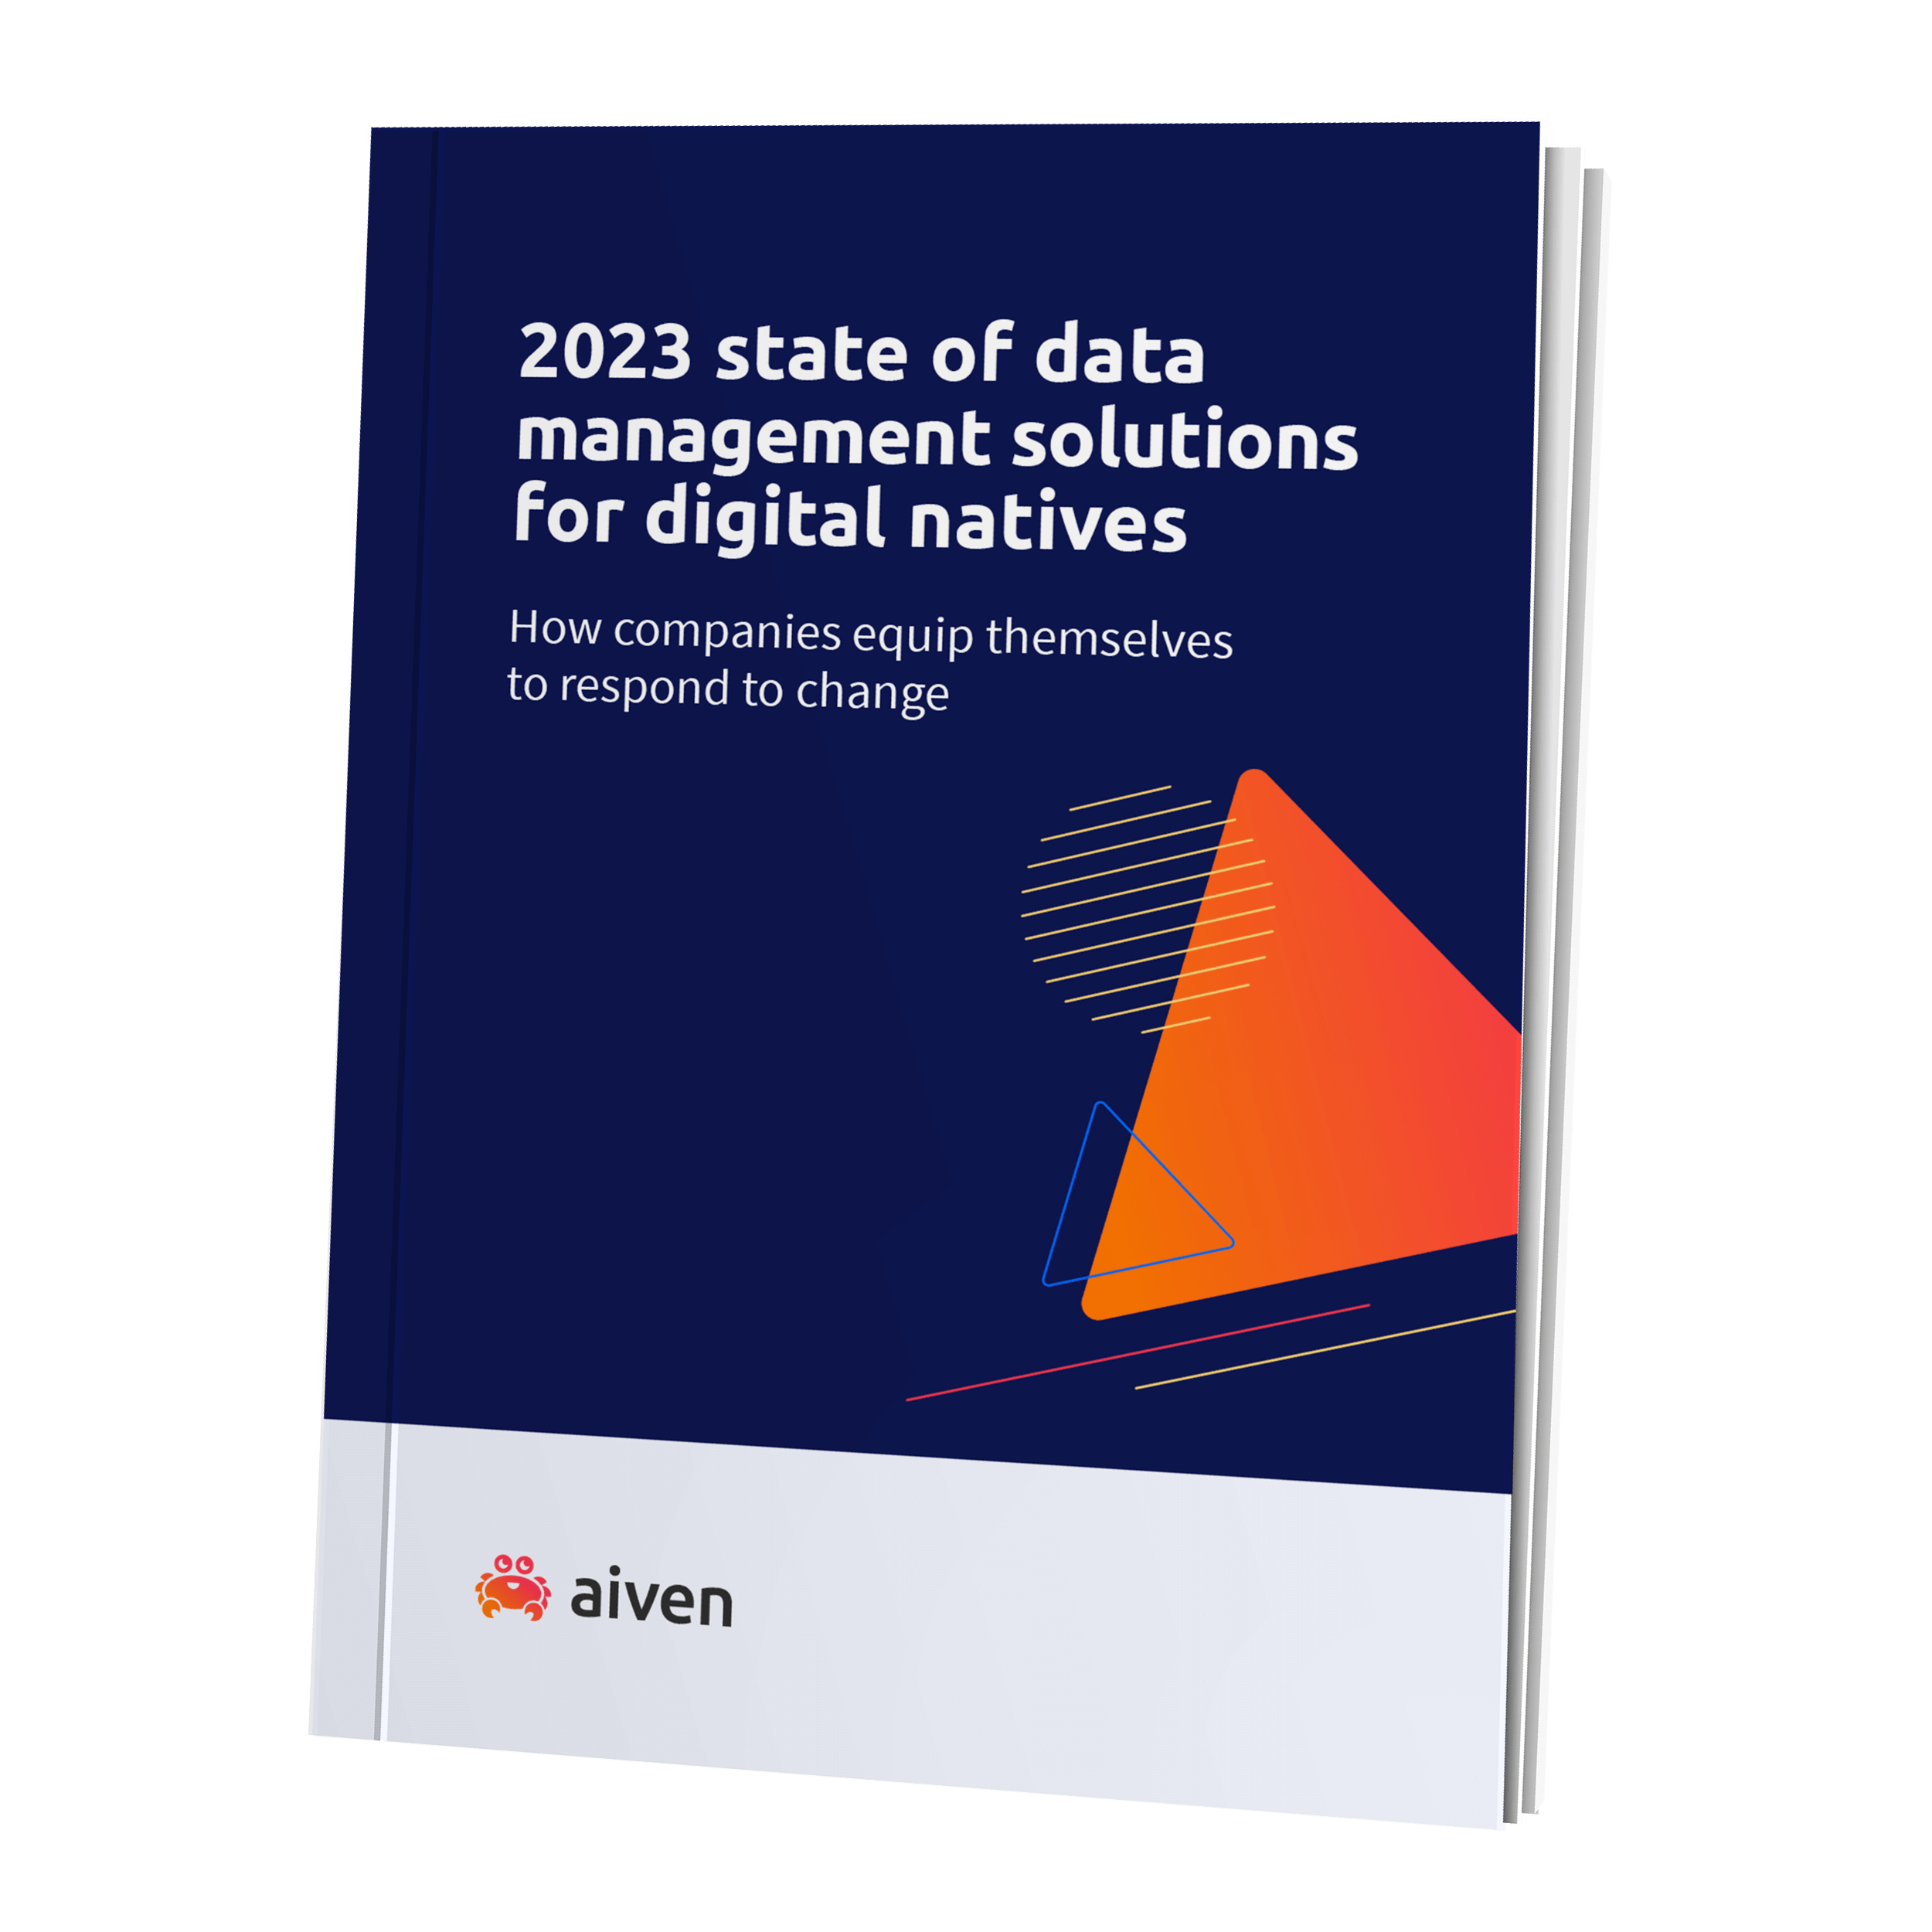 research-cover-2023-state-of-data-management-solutions-for-digital-natives.png